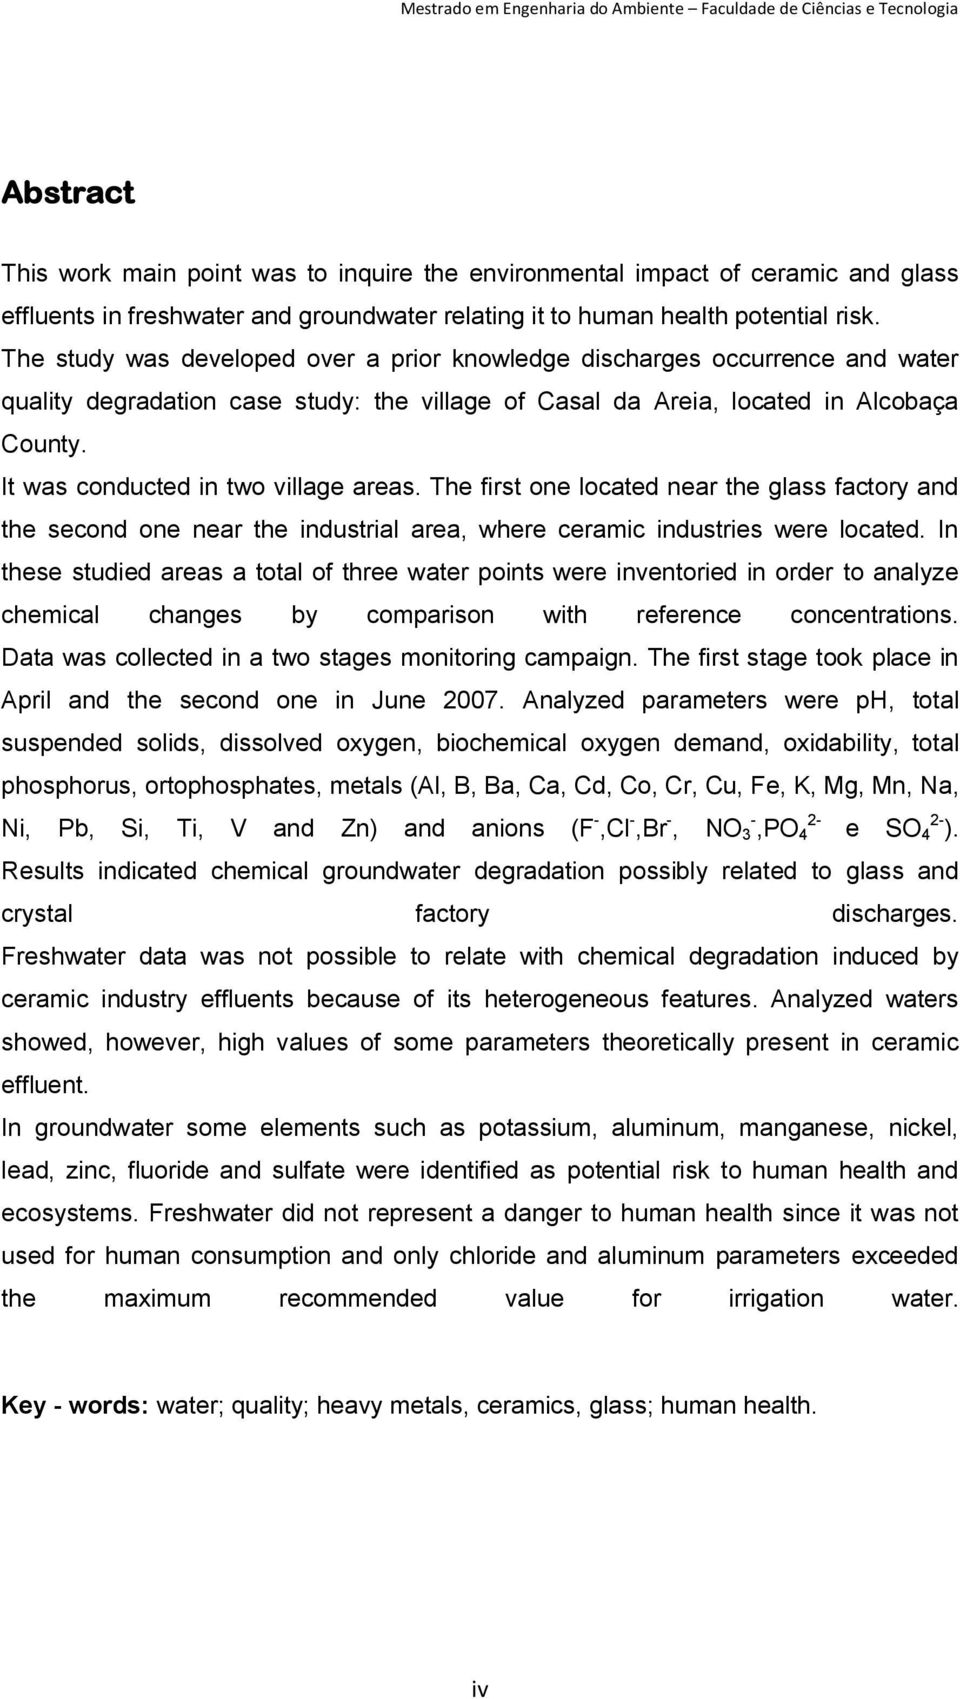 The study was developed over a prior knowledge discharges occurrence and water quality degradation case study: the village of Casal da Areia, located in Alcobaça County.